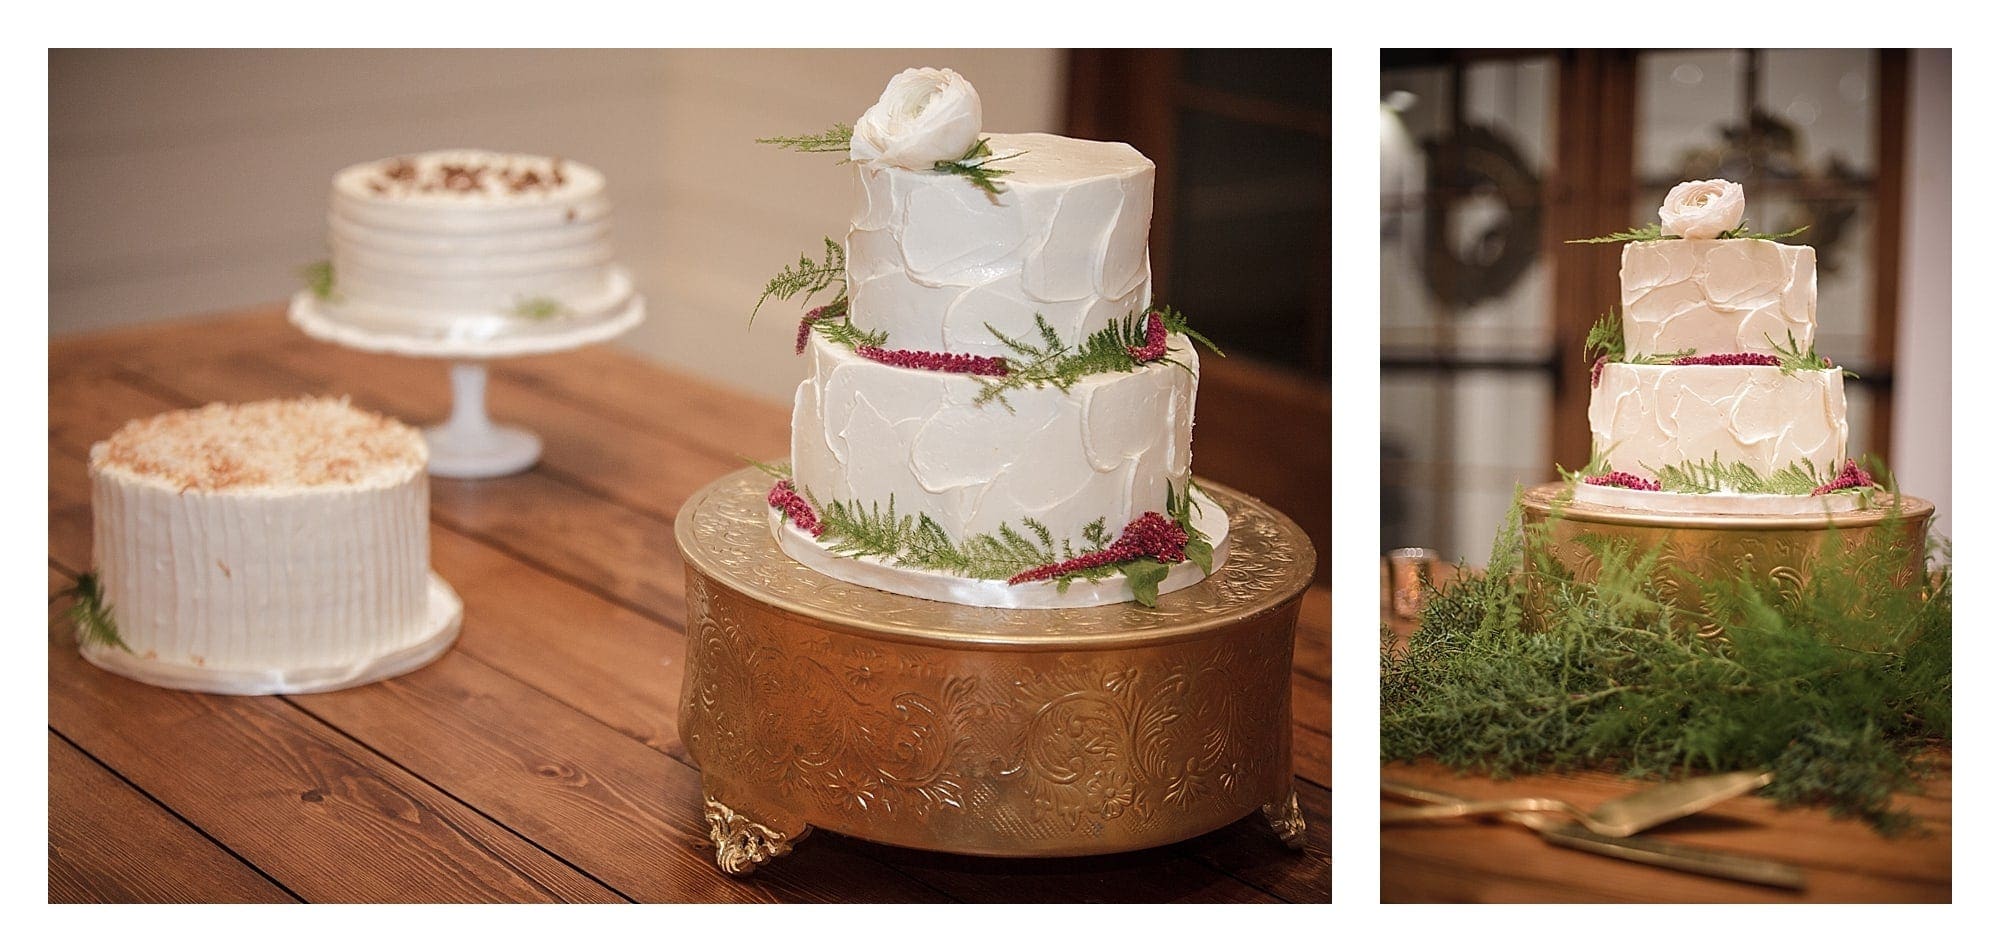 beautiful selection of cakes at wedding